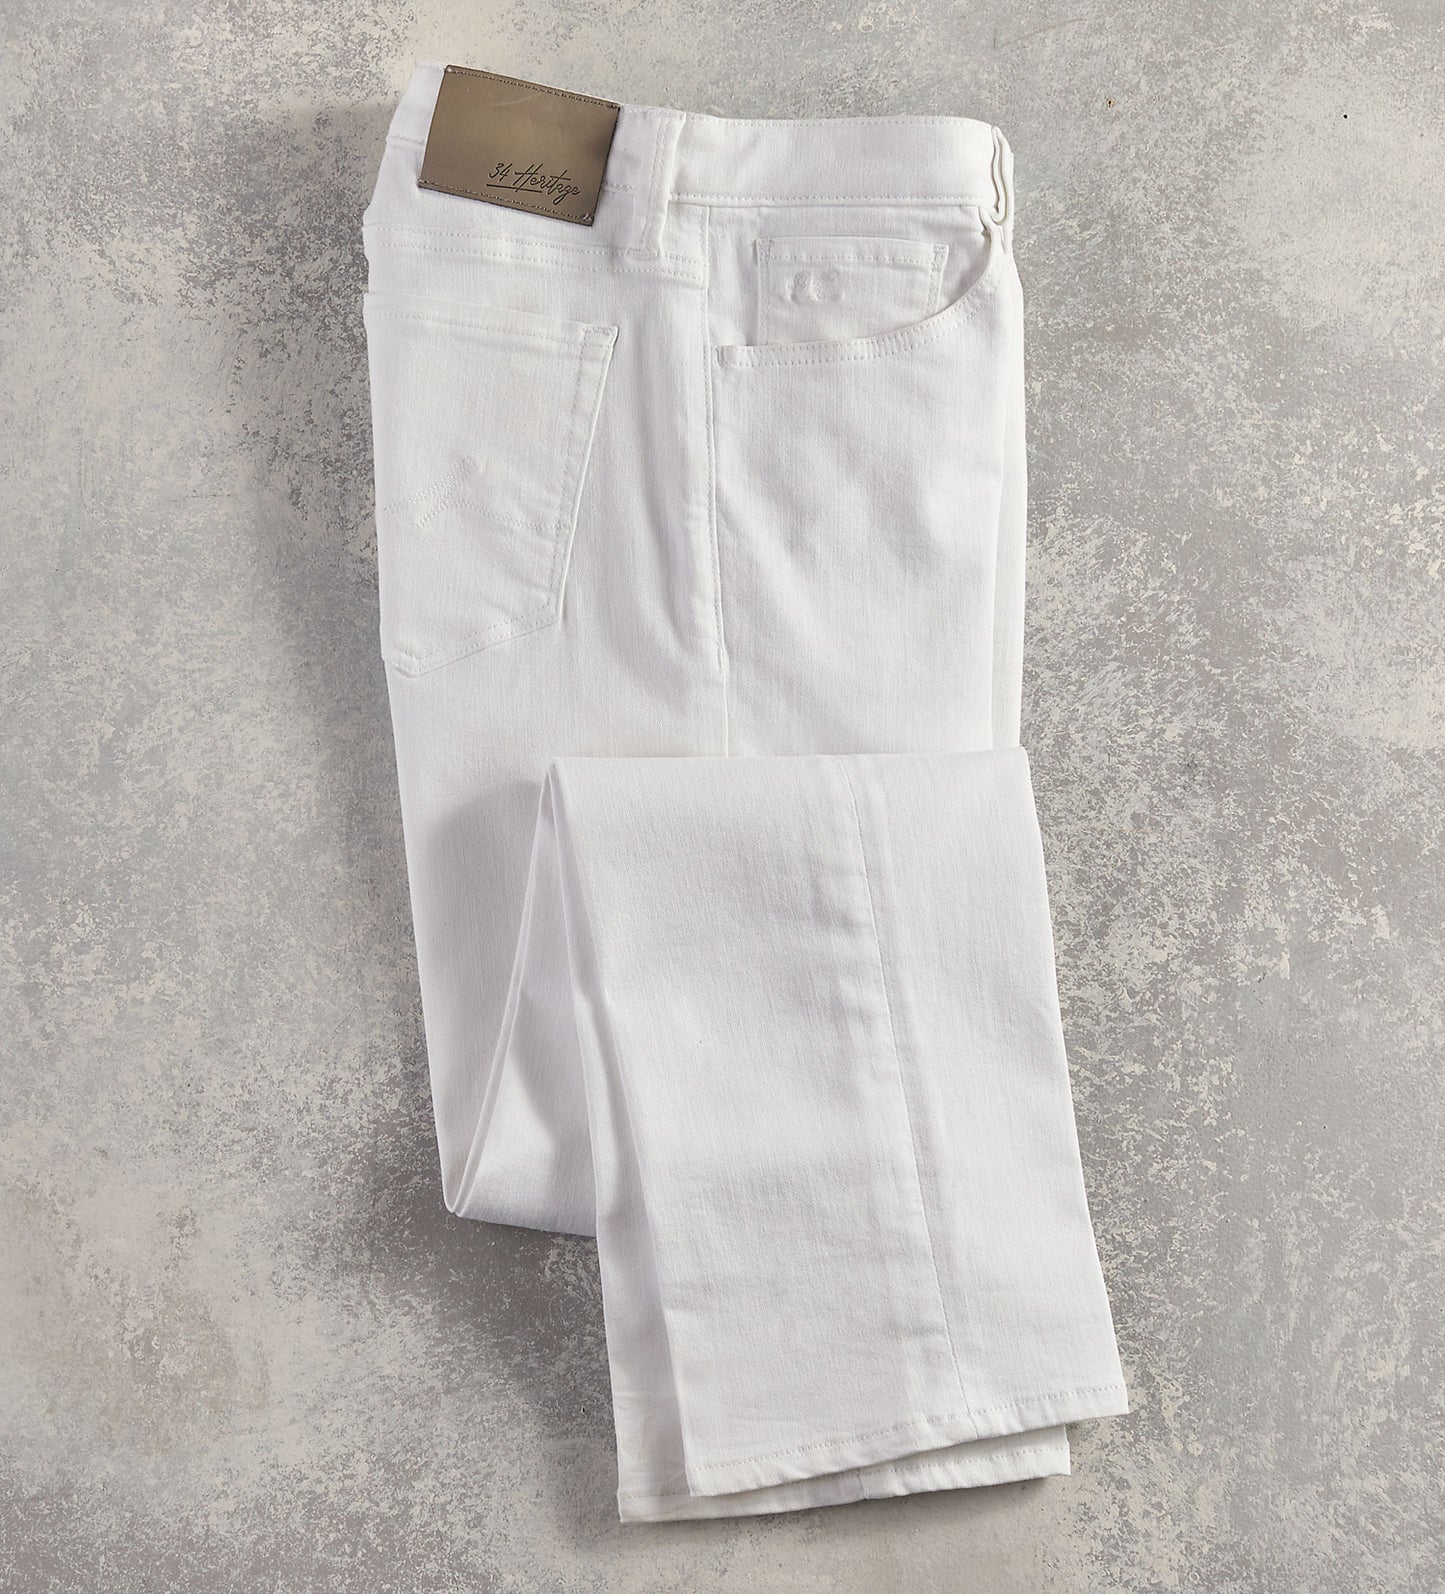 34 Heritage White Courage Jeans